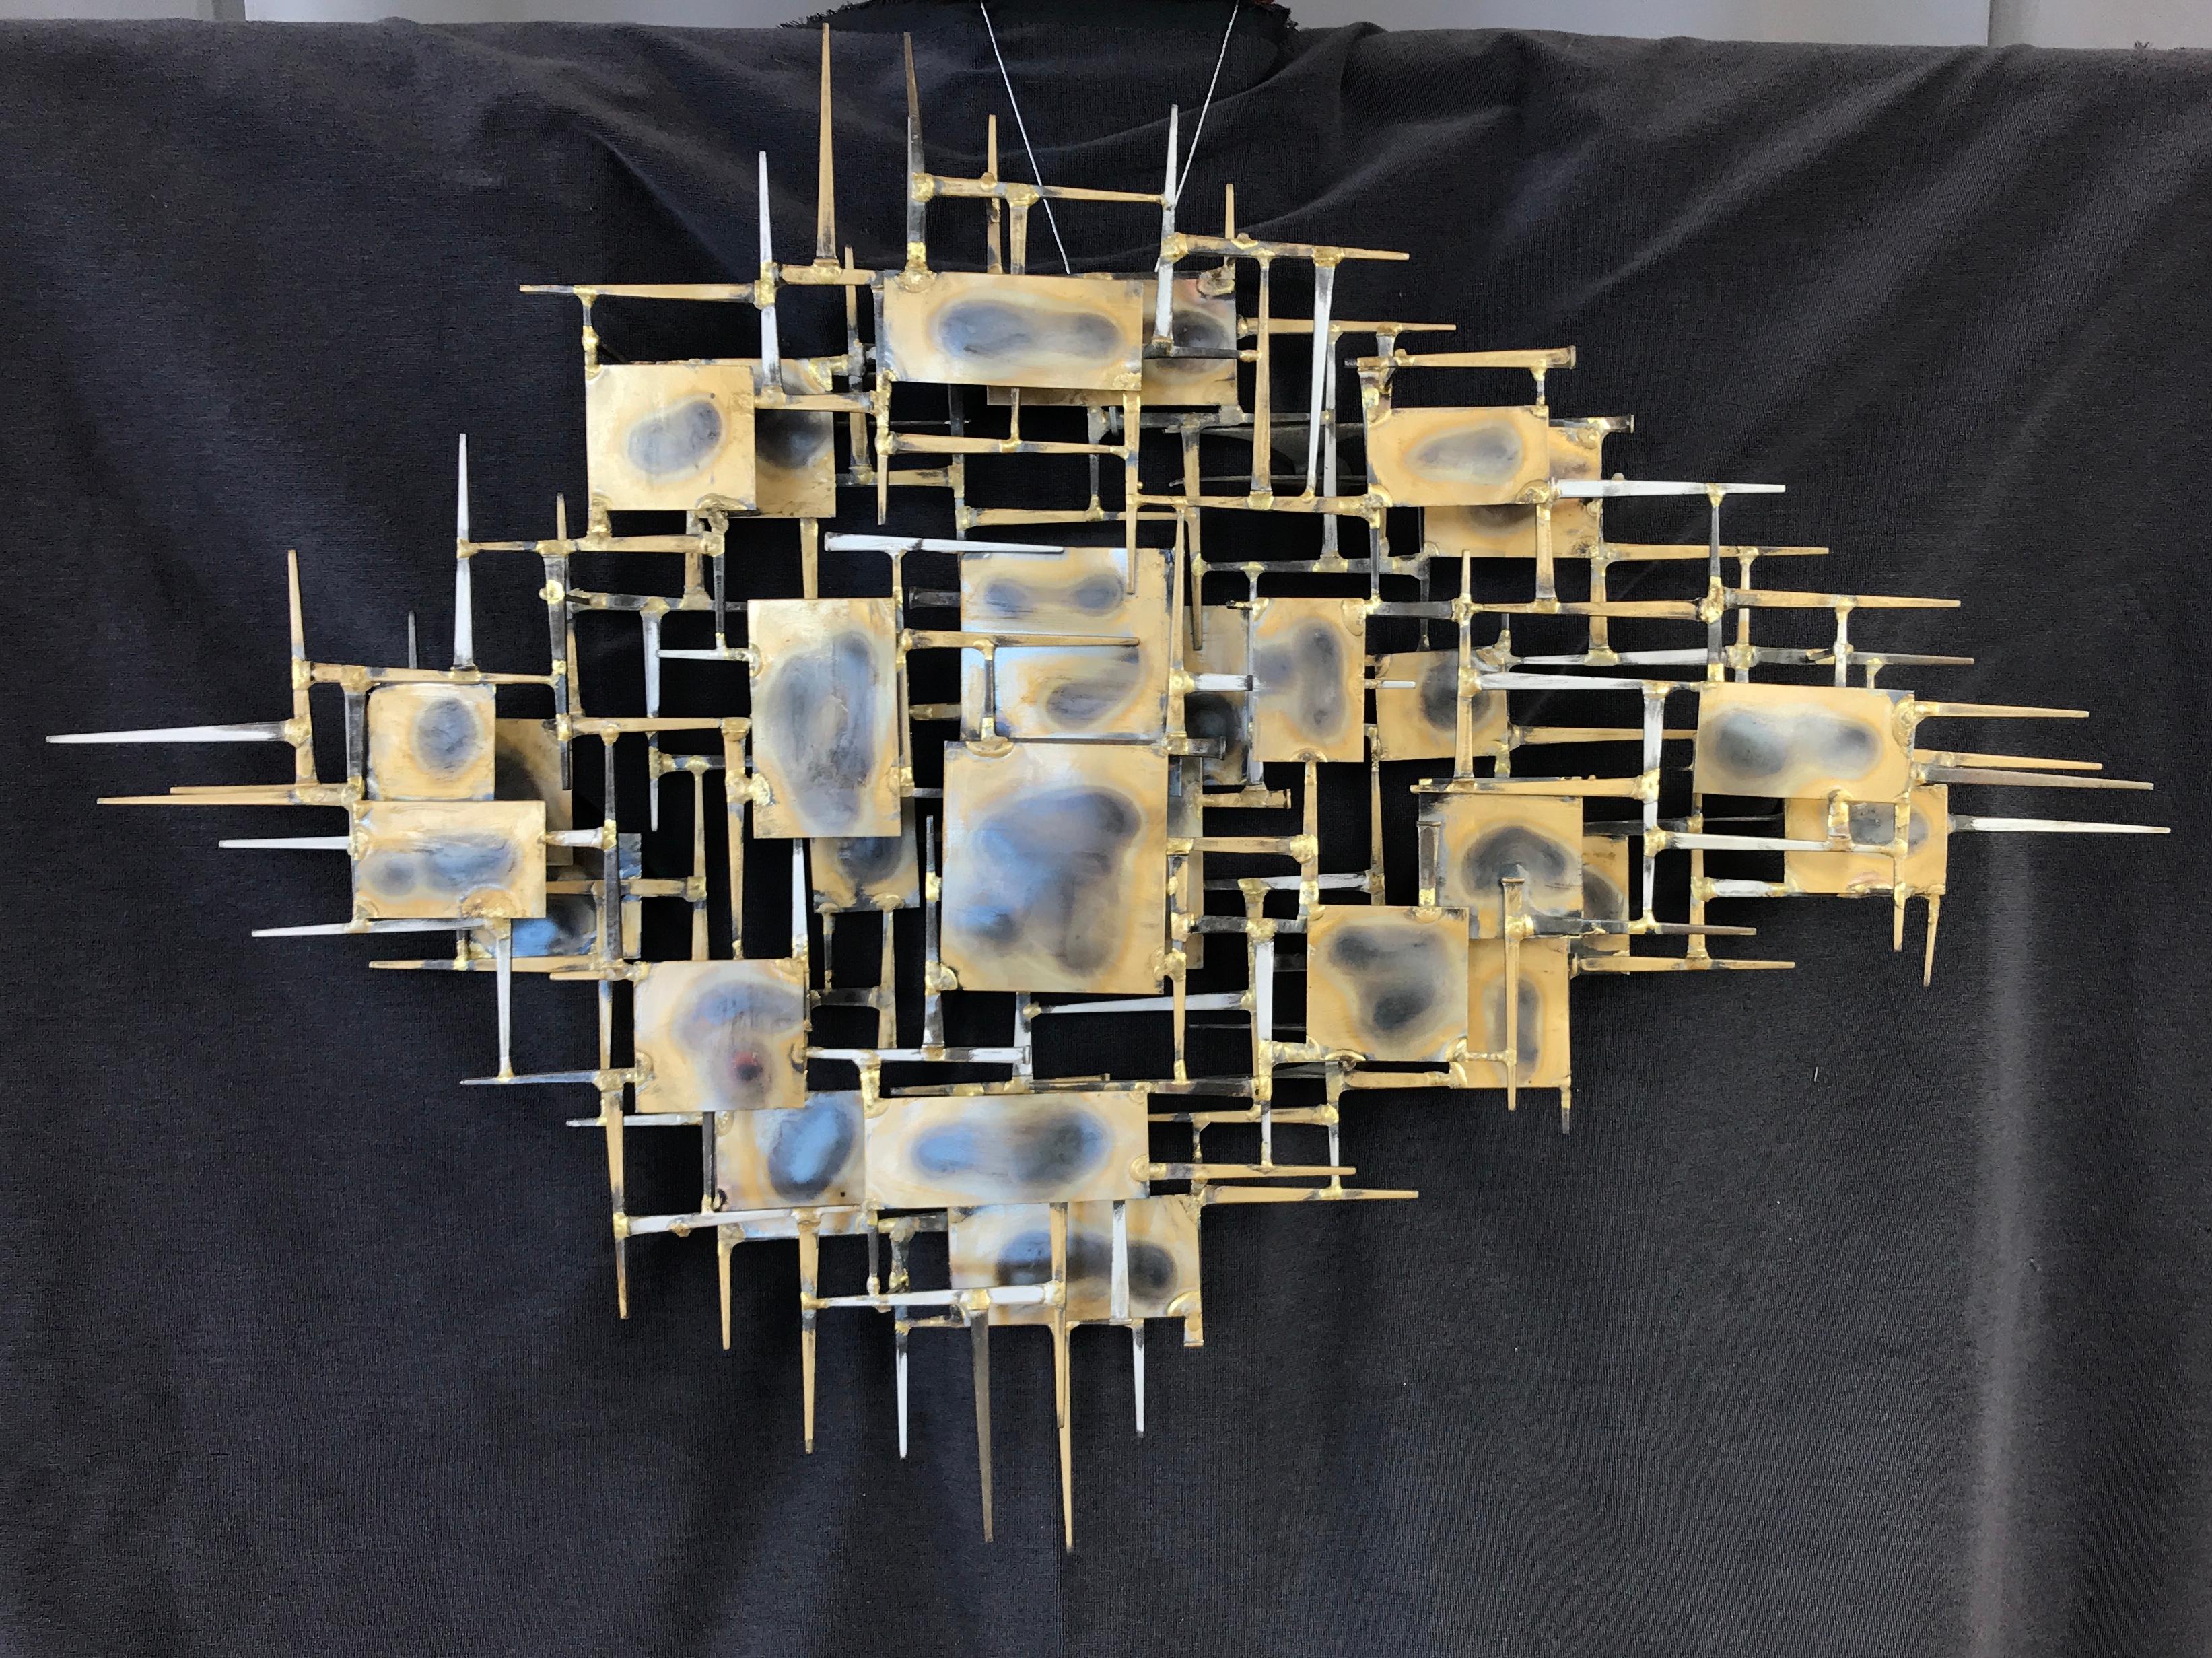 A large brutalist abstract wall sculpture by Marc Creates, circa 1978.
It's made of nails and plates welded and torched, a classic brutalist sculpture.